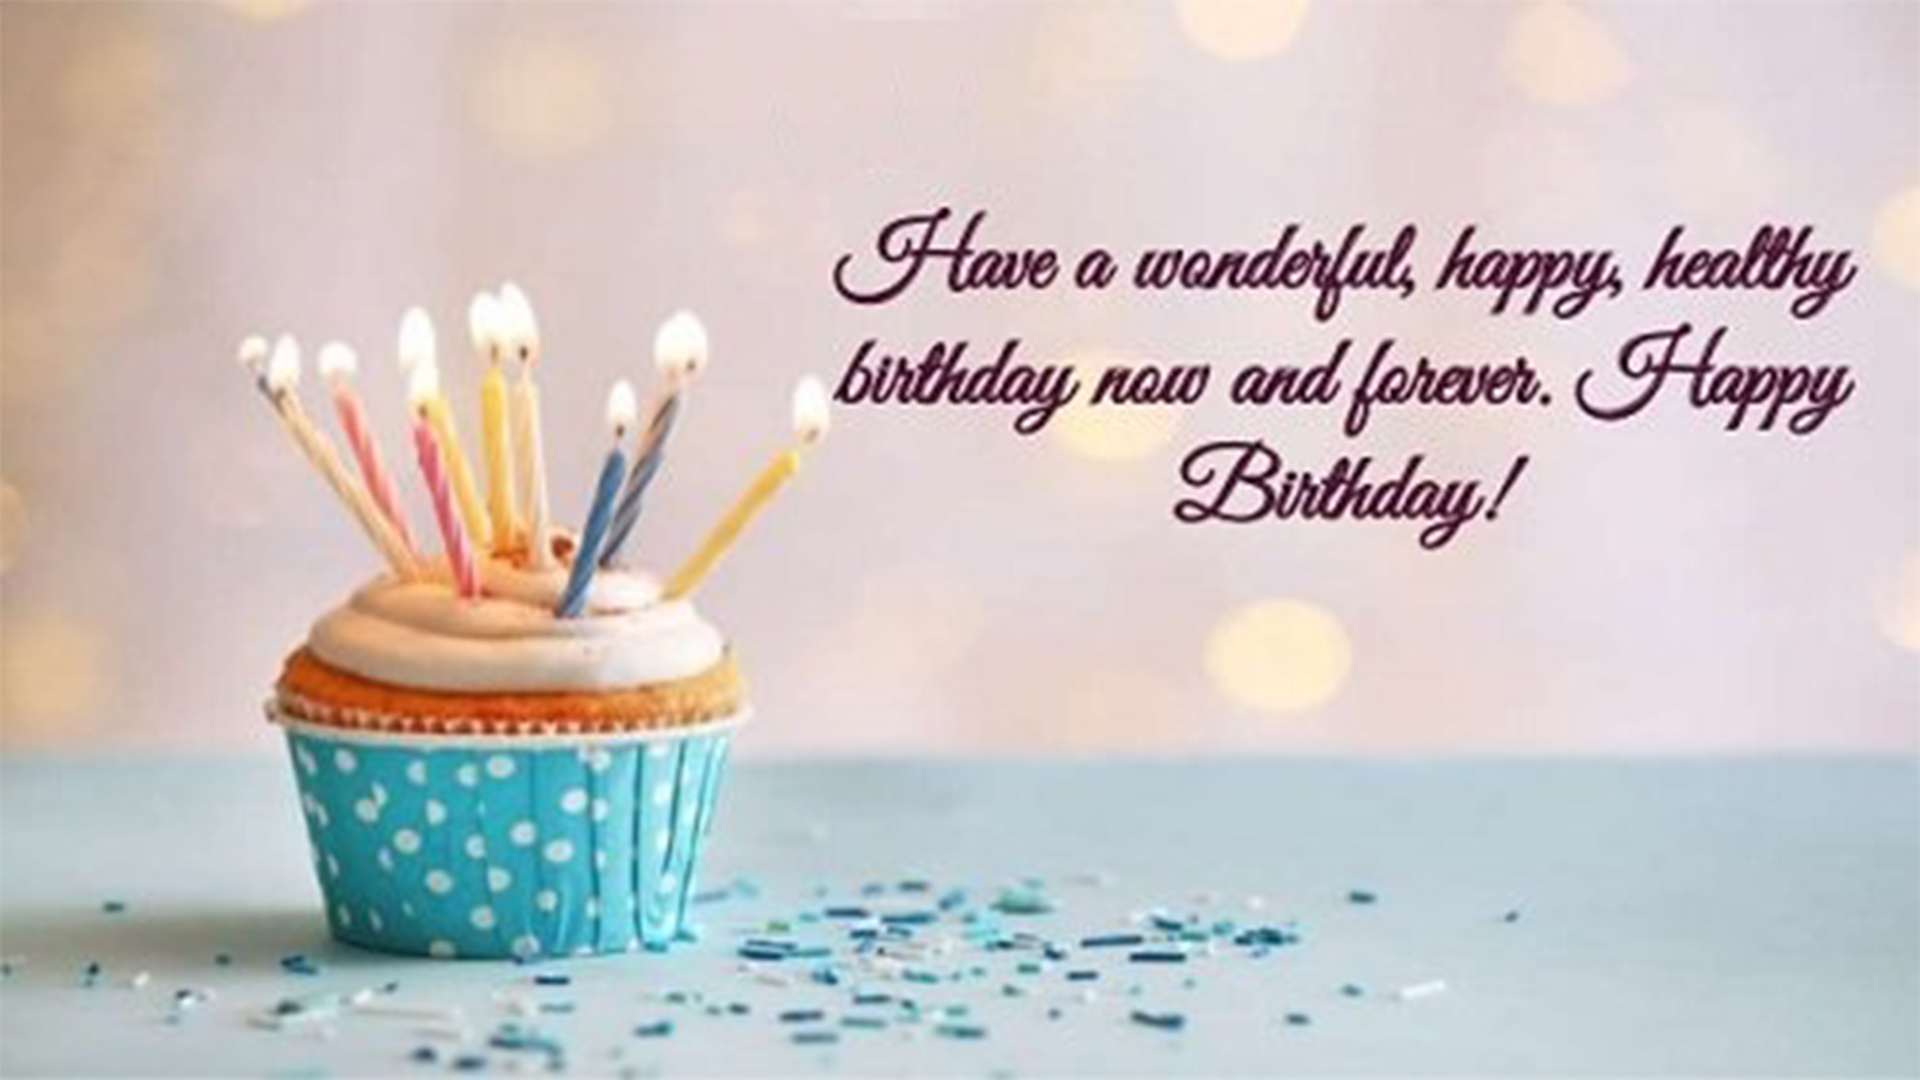 Happy Birthday Wishes Images | Birthday Greetings & Messages